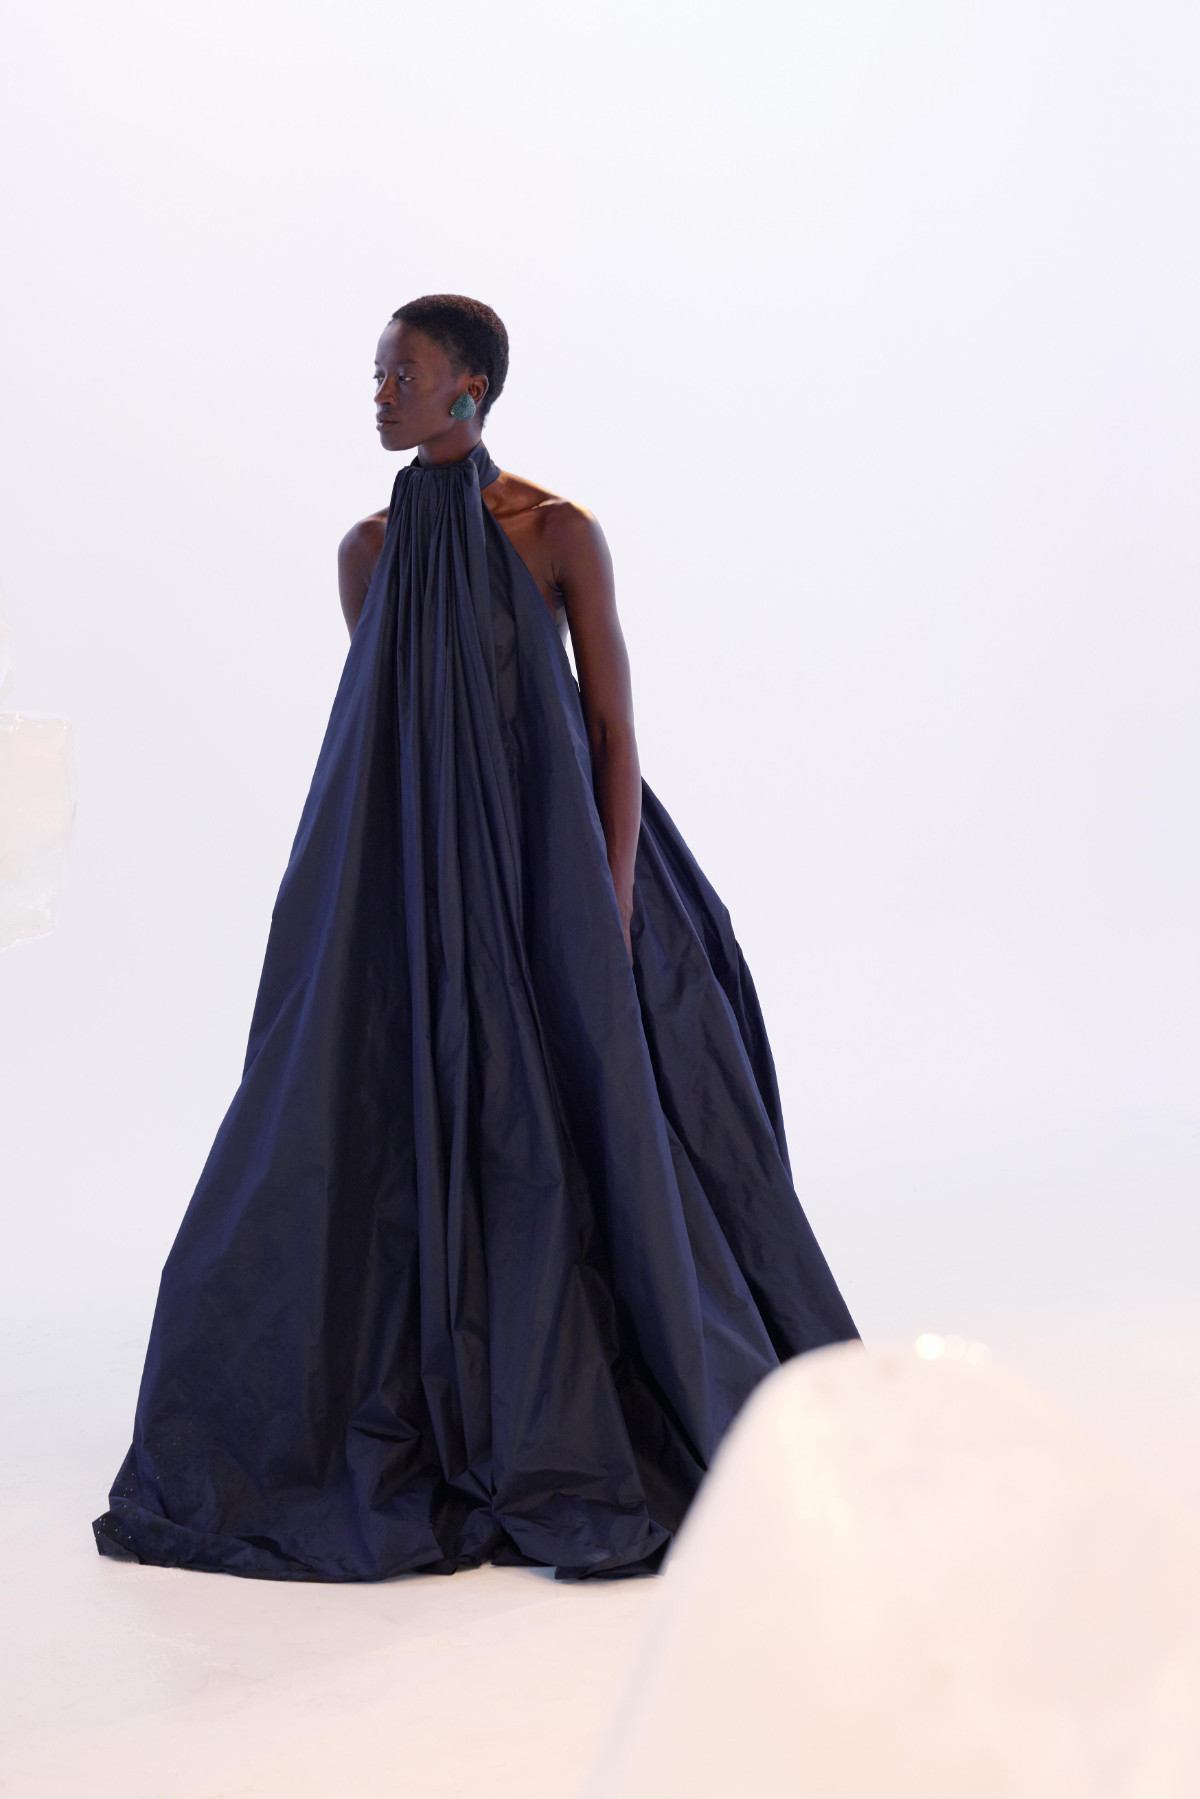 Maison Rabih Kayrouz Presents Its New Couture & Spring Summer 2023 Collection